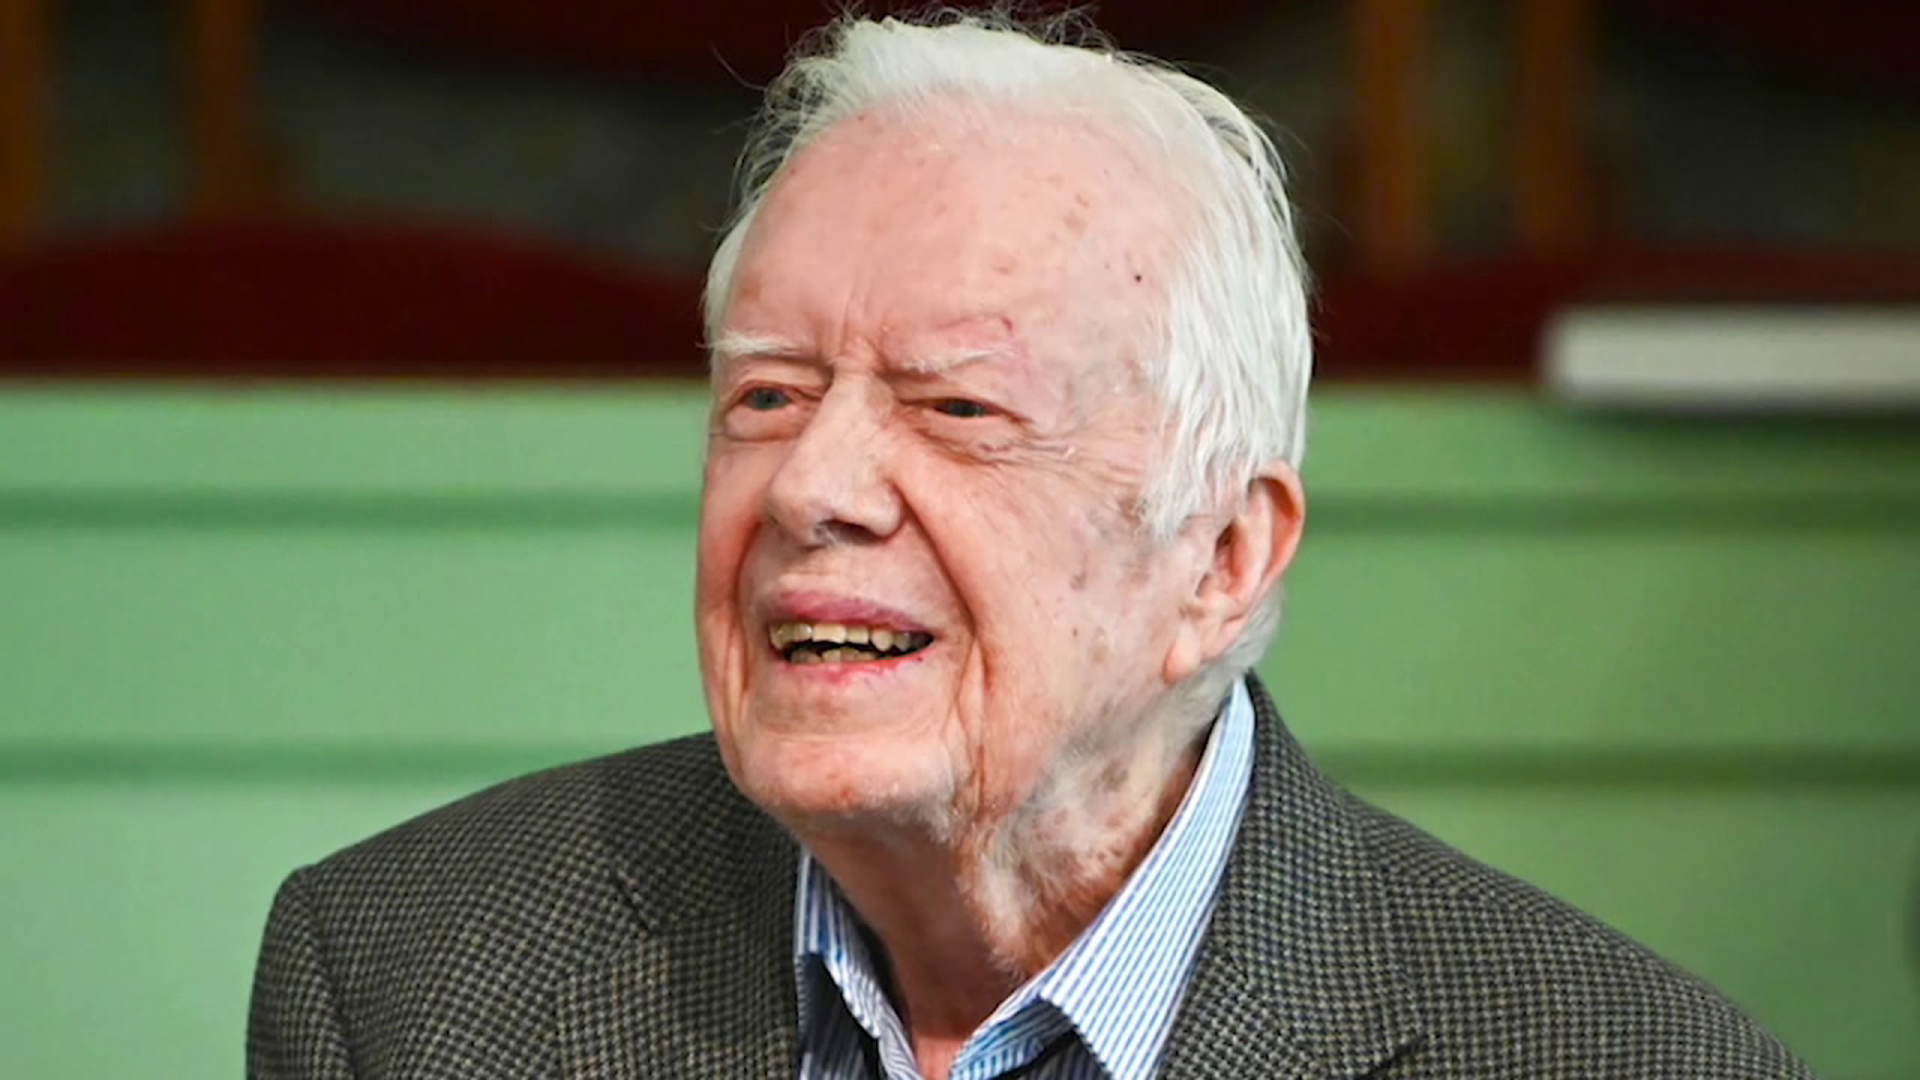 Since news broke of Jimmy Carter's decision to receive hospice care at home, messages of kindness and support have poured in.